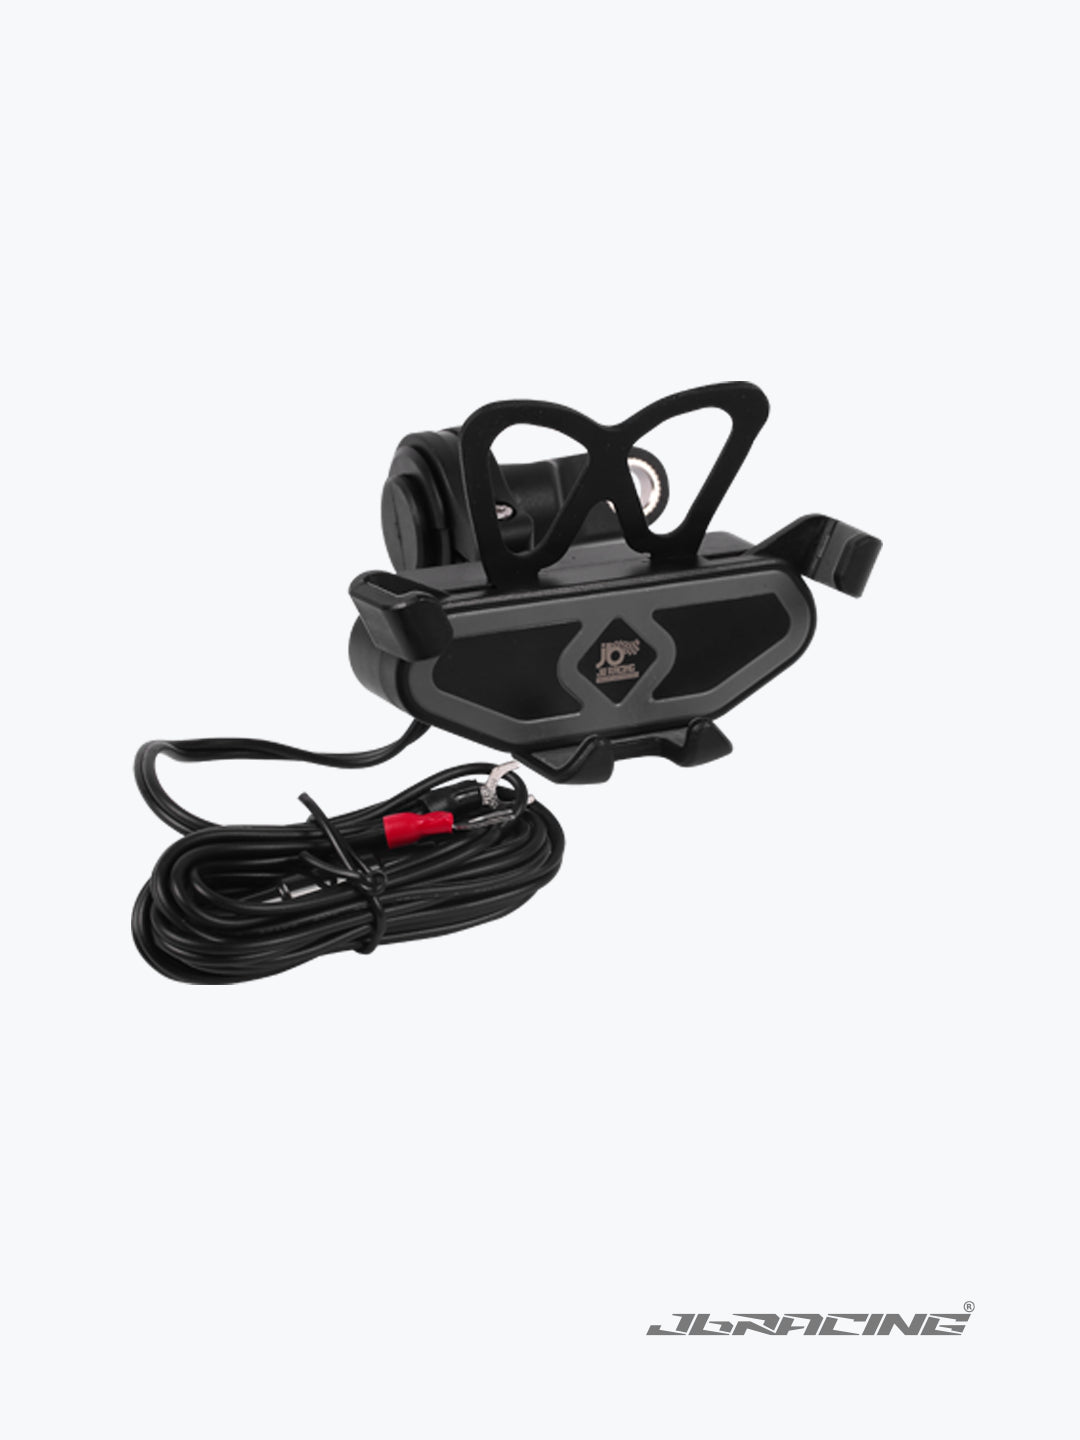 JB Racing M10 Mobile Holder With USB Charger